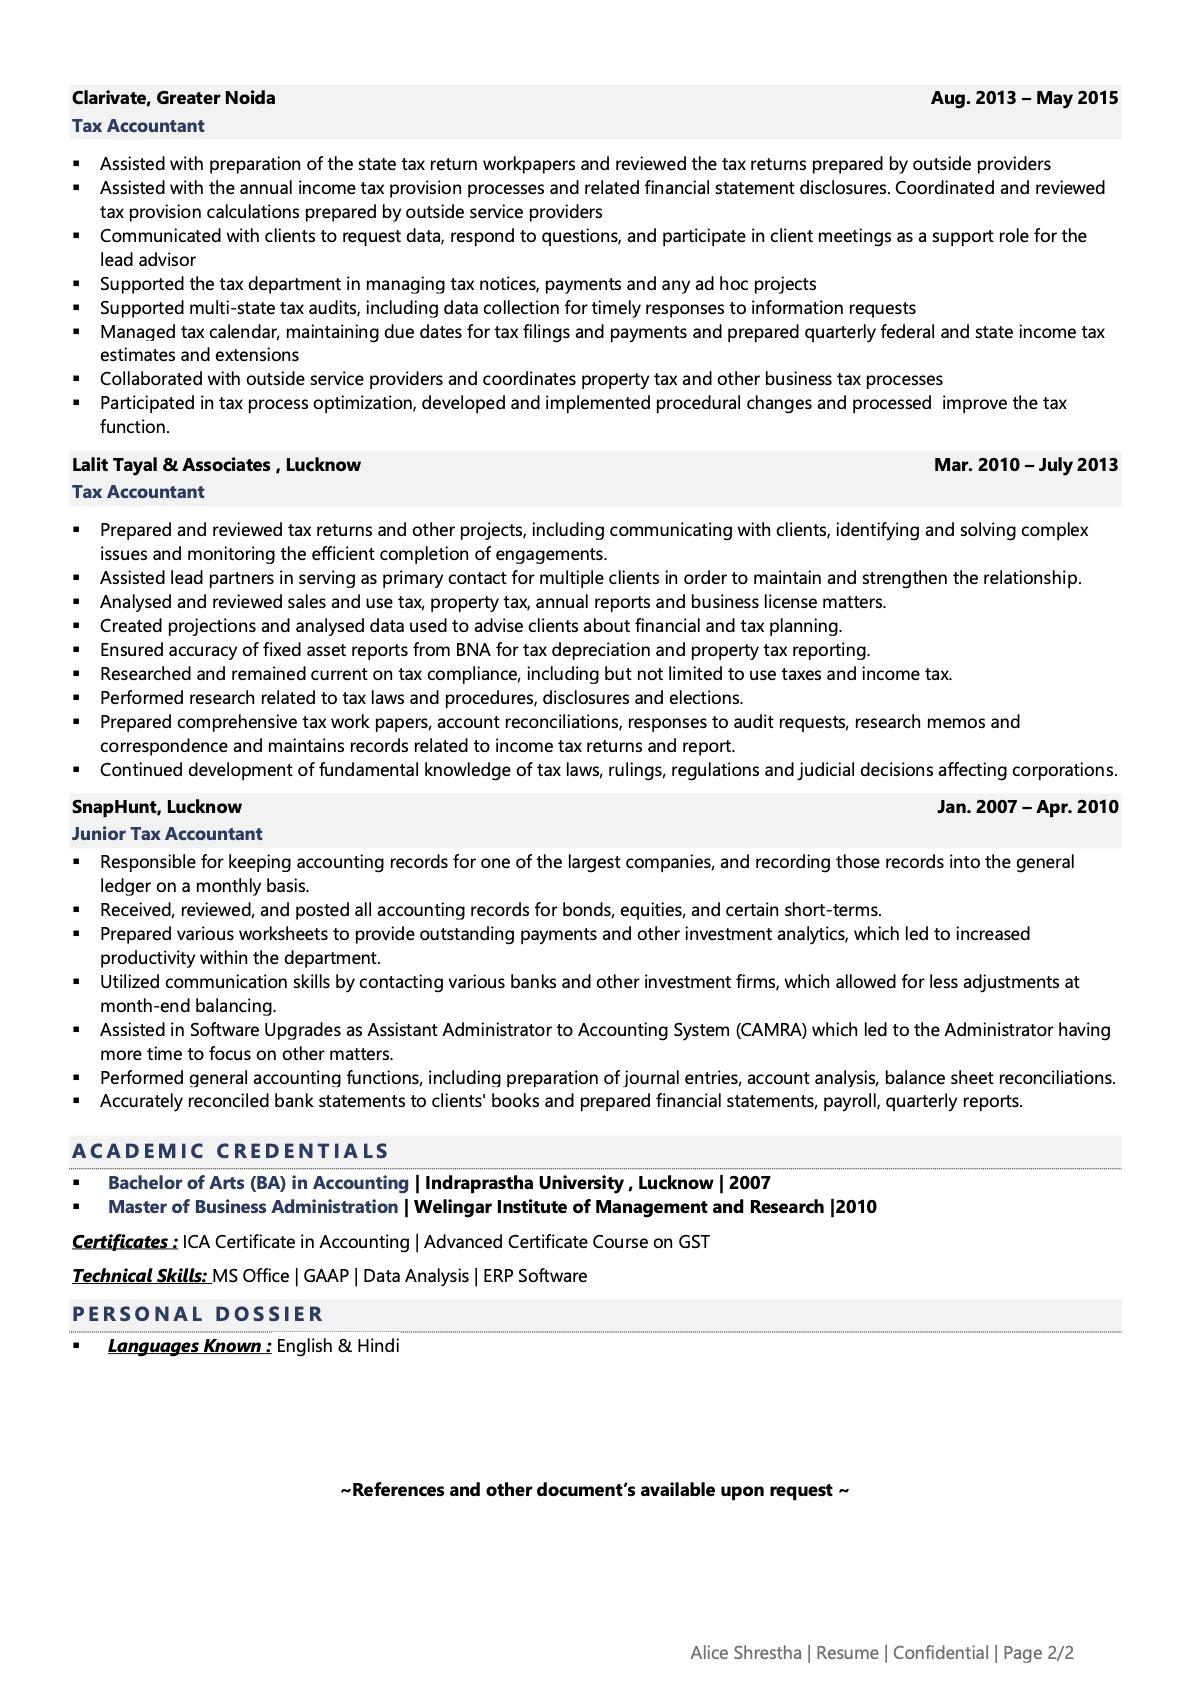 sample resume of experienced accountant